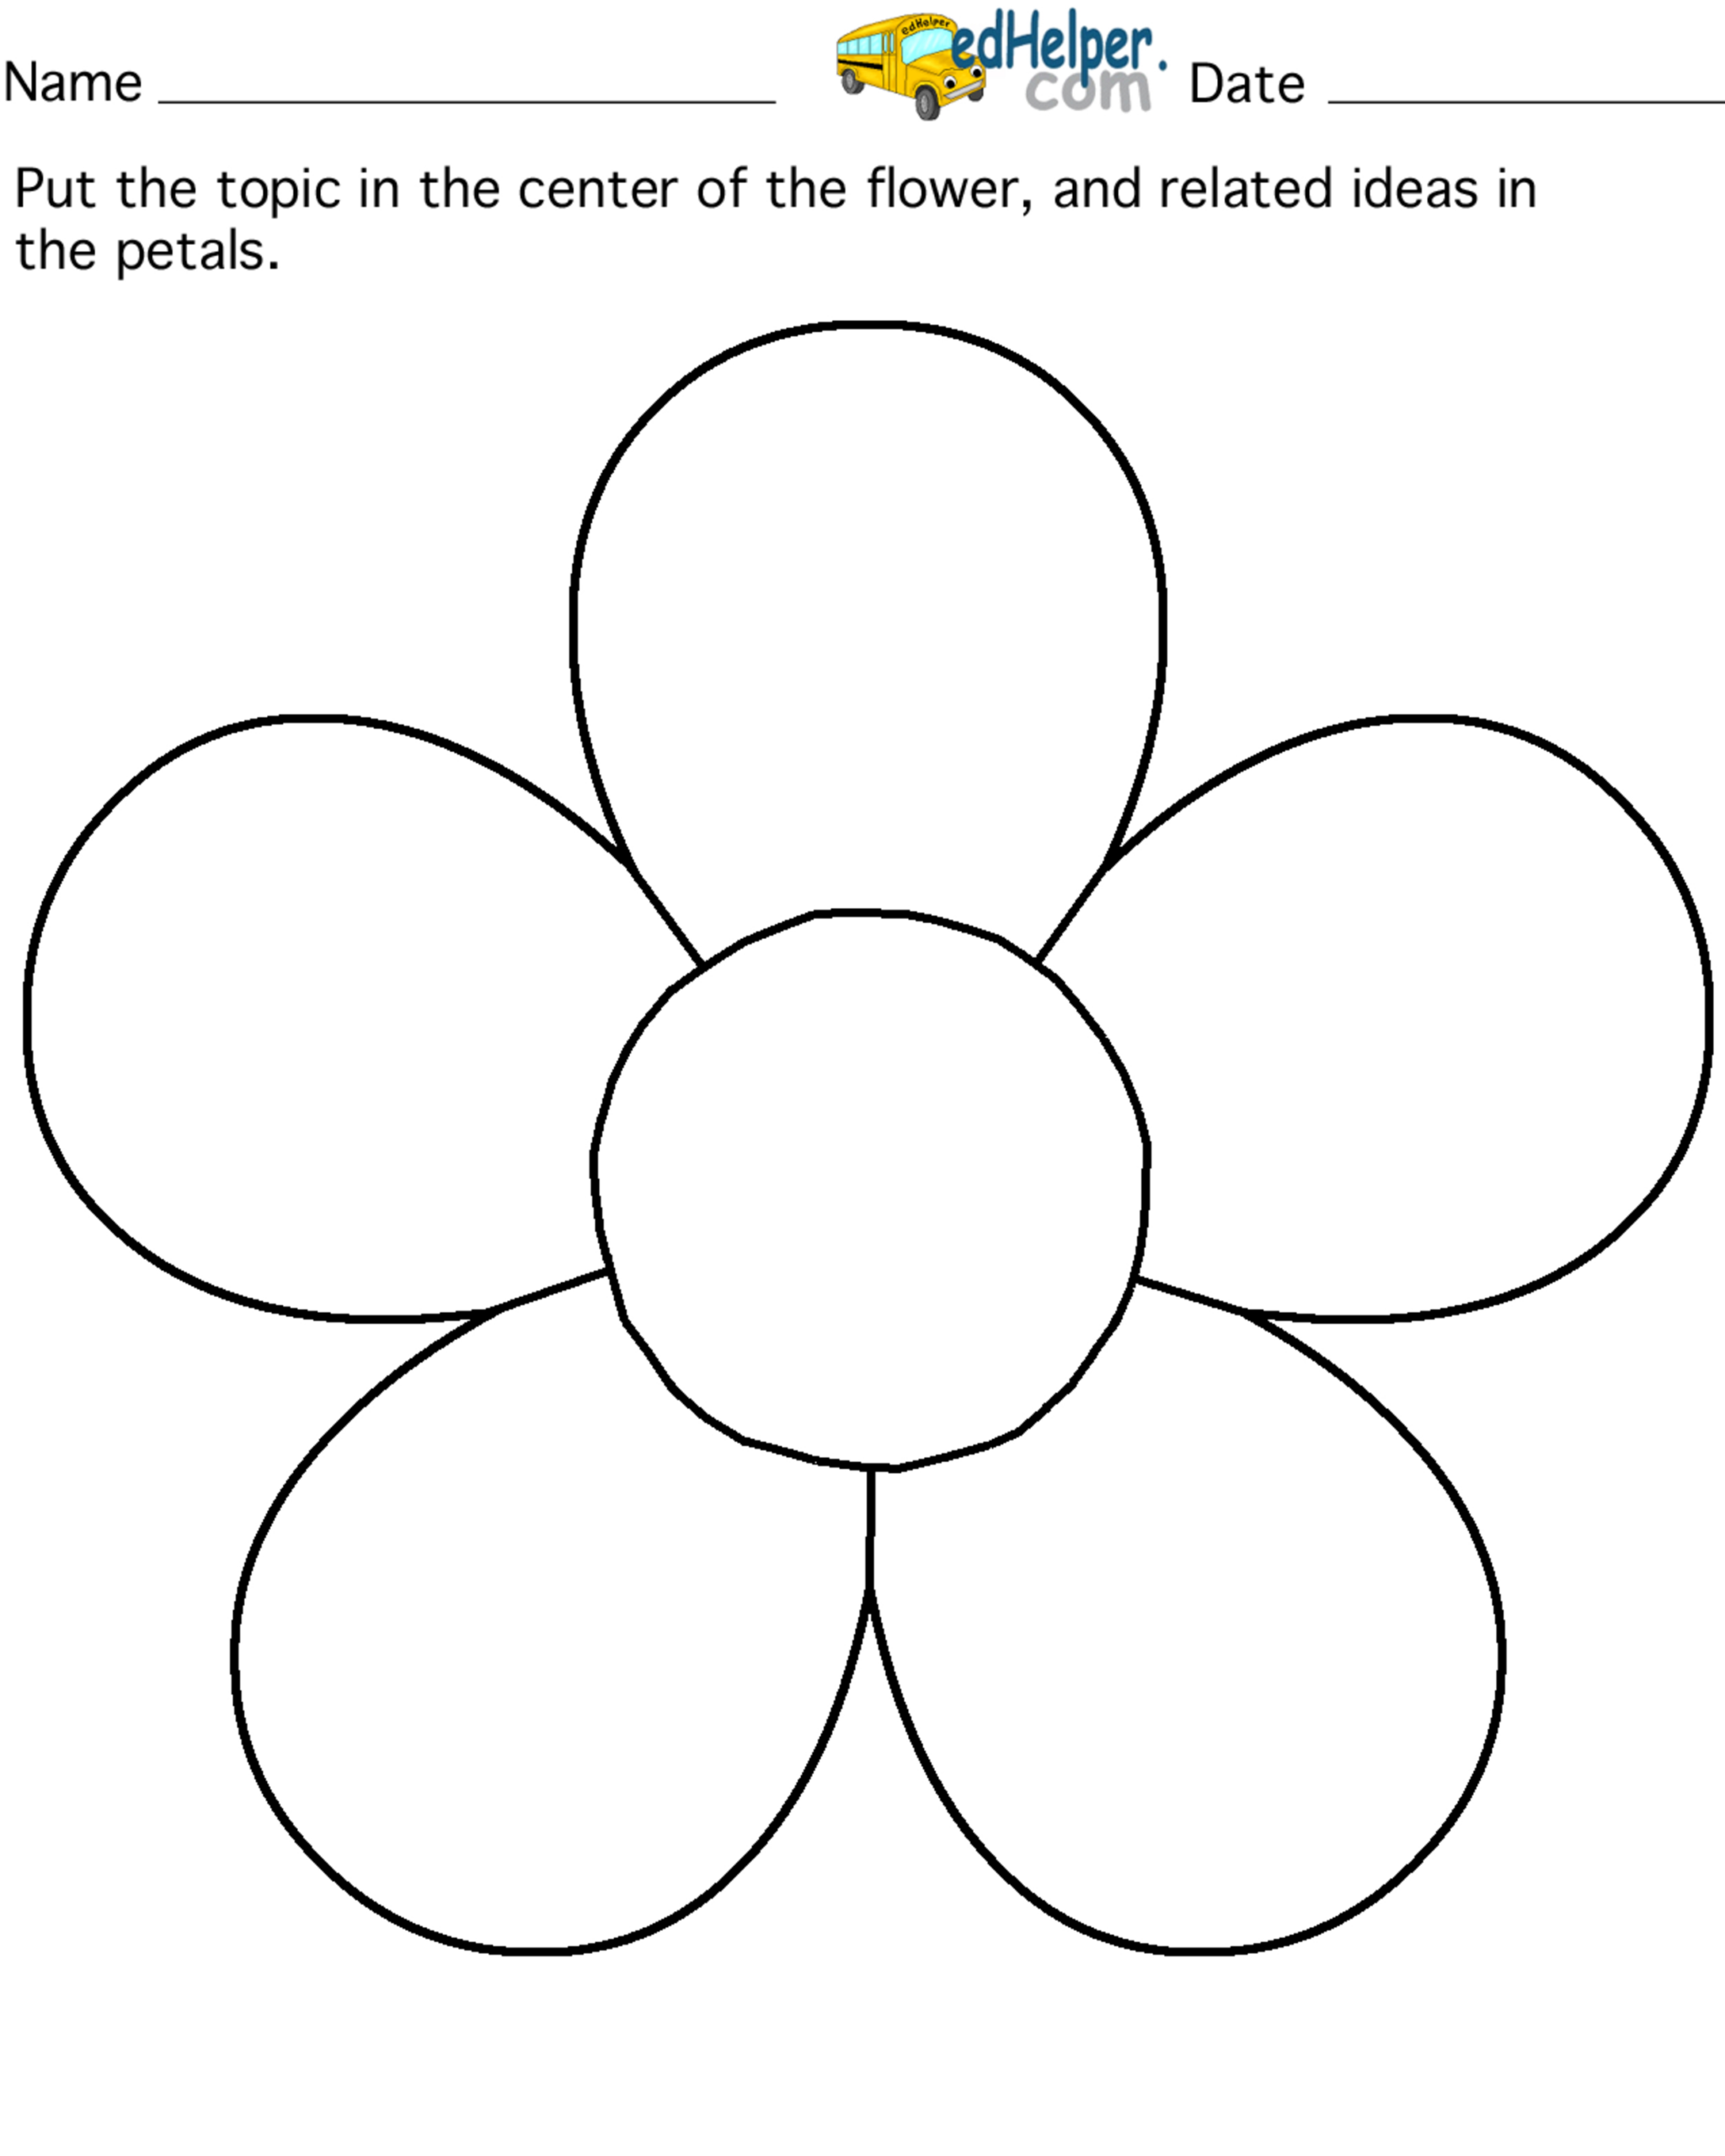 Flower Petal Coloring Pages with 5 Petal Flower Template Free Printable